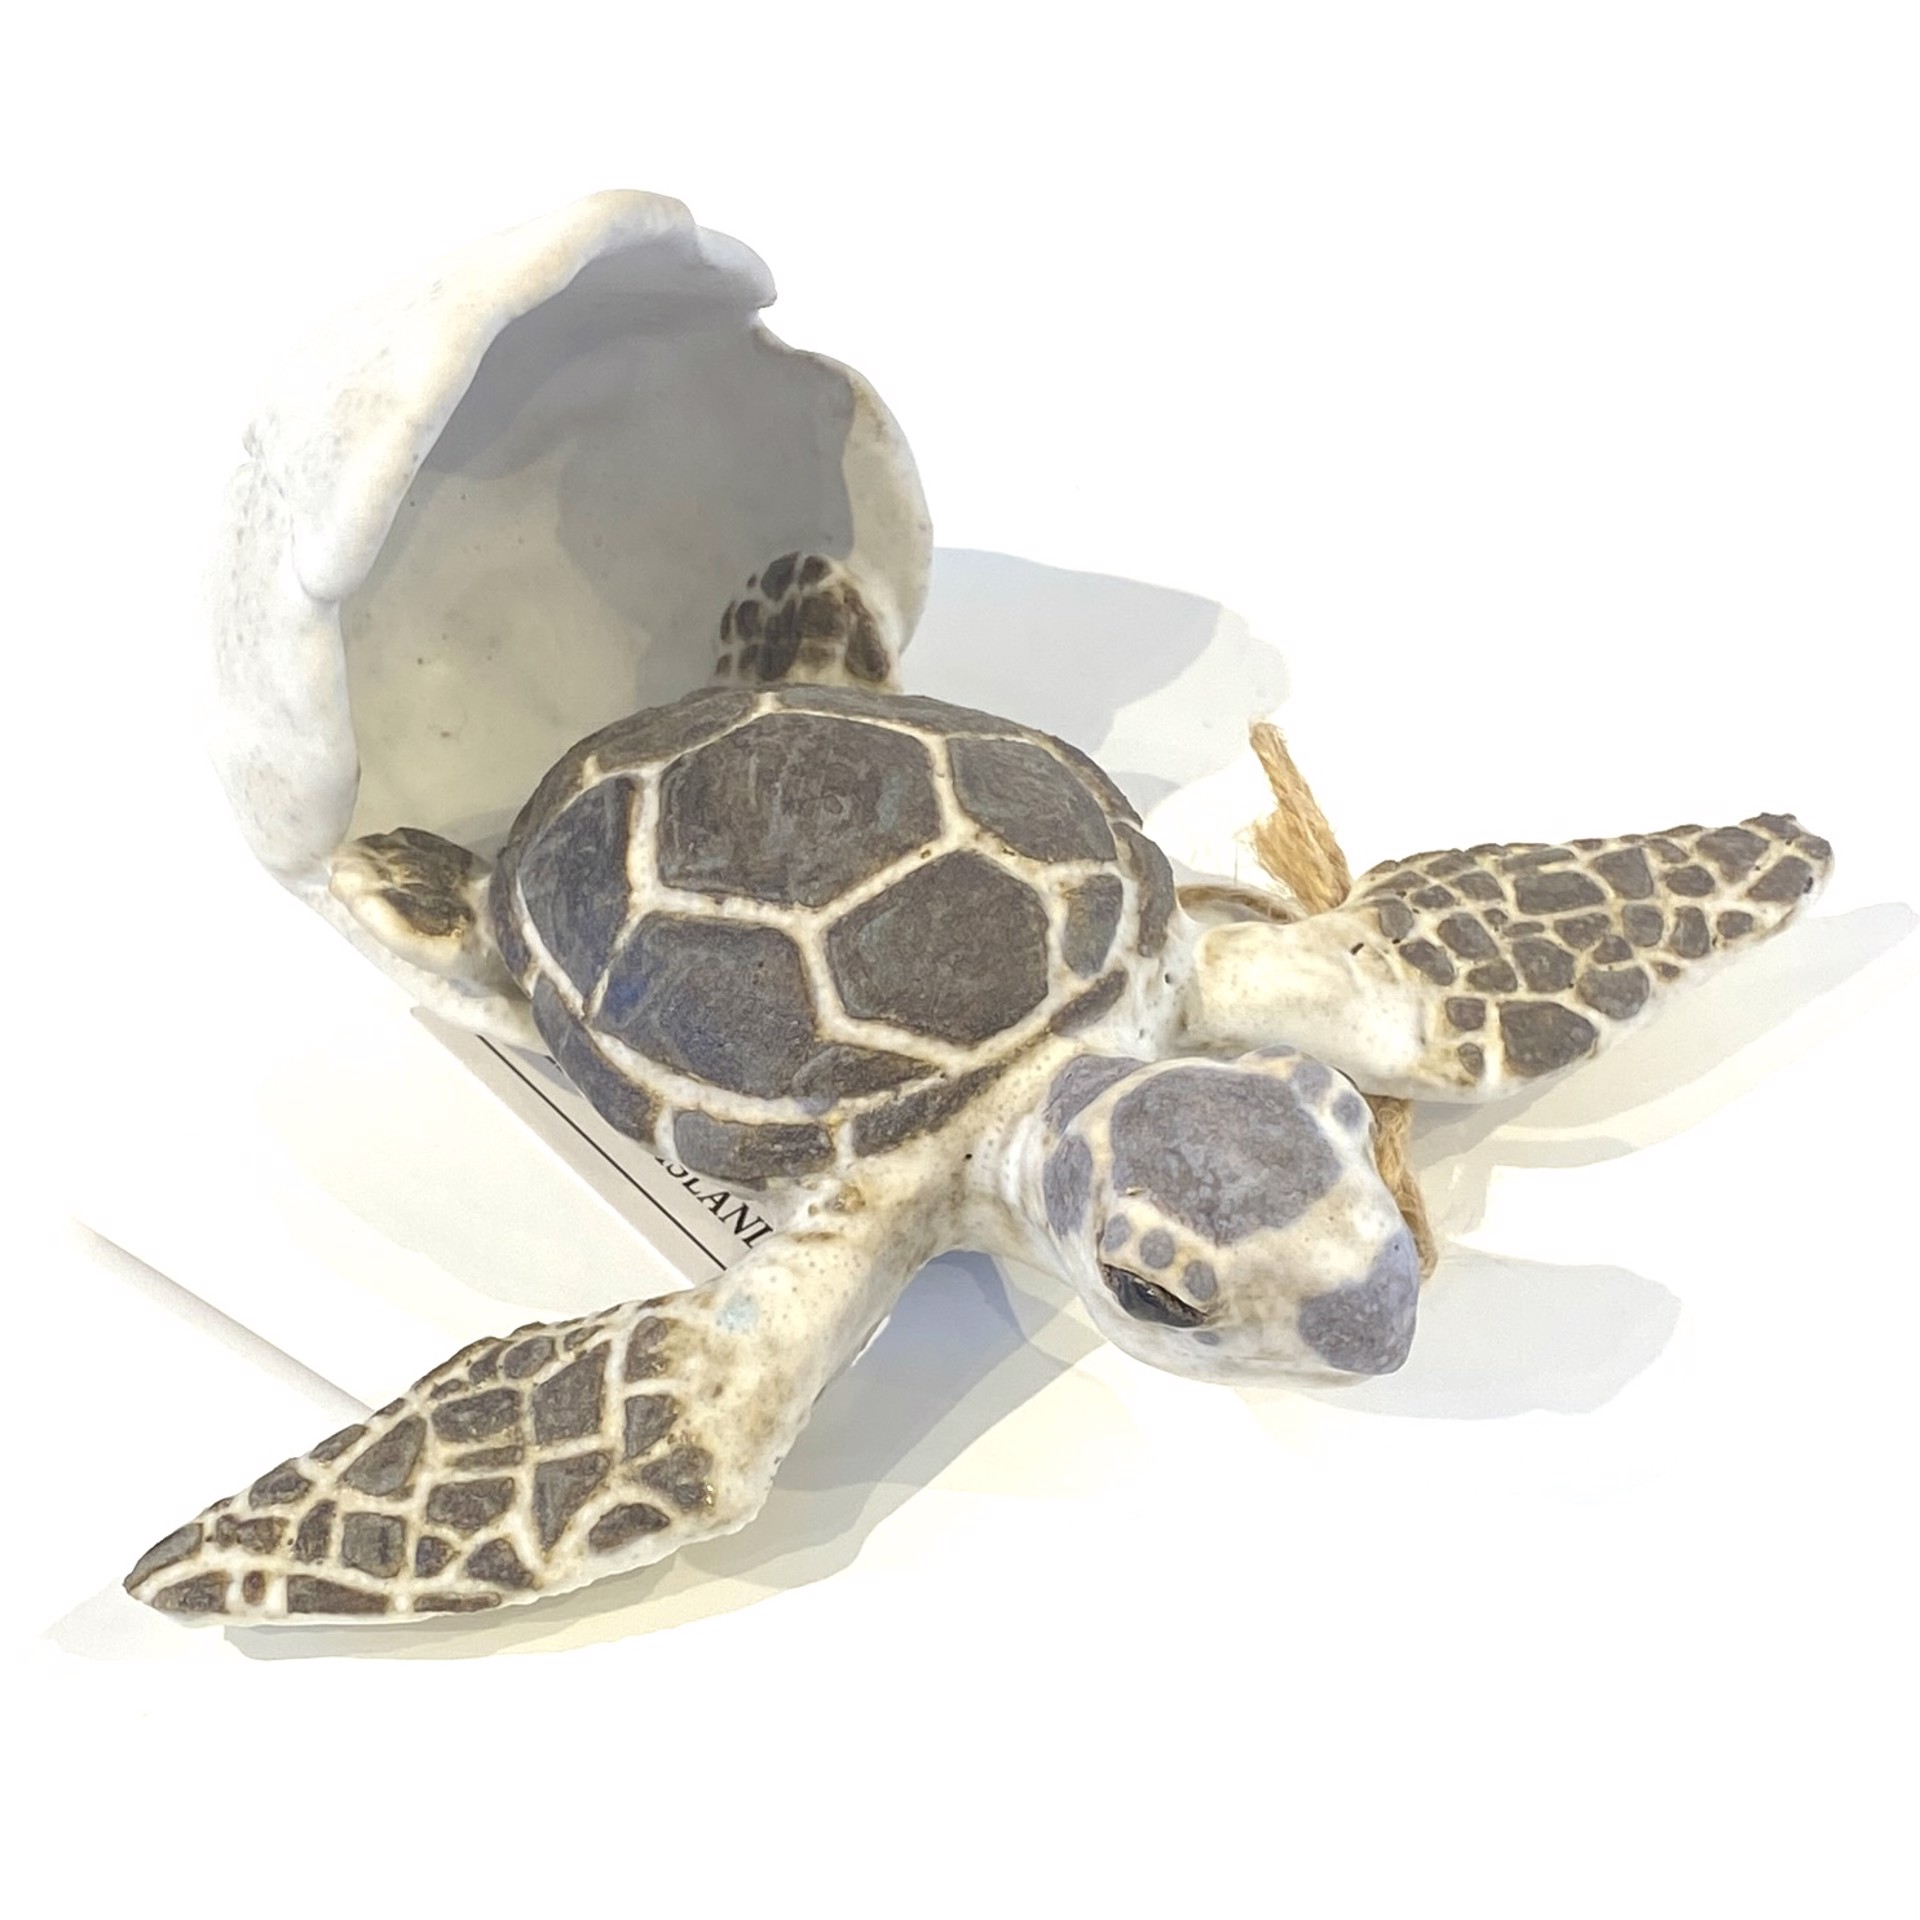 Atlantic Green Turtle Hatchling with Shell SG23-60 by Shayne Greco